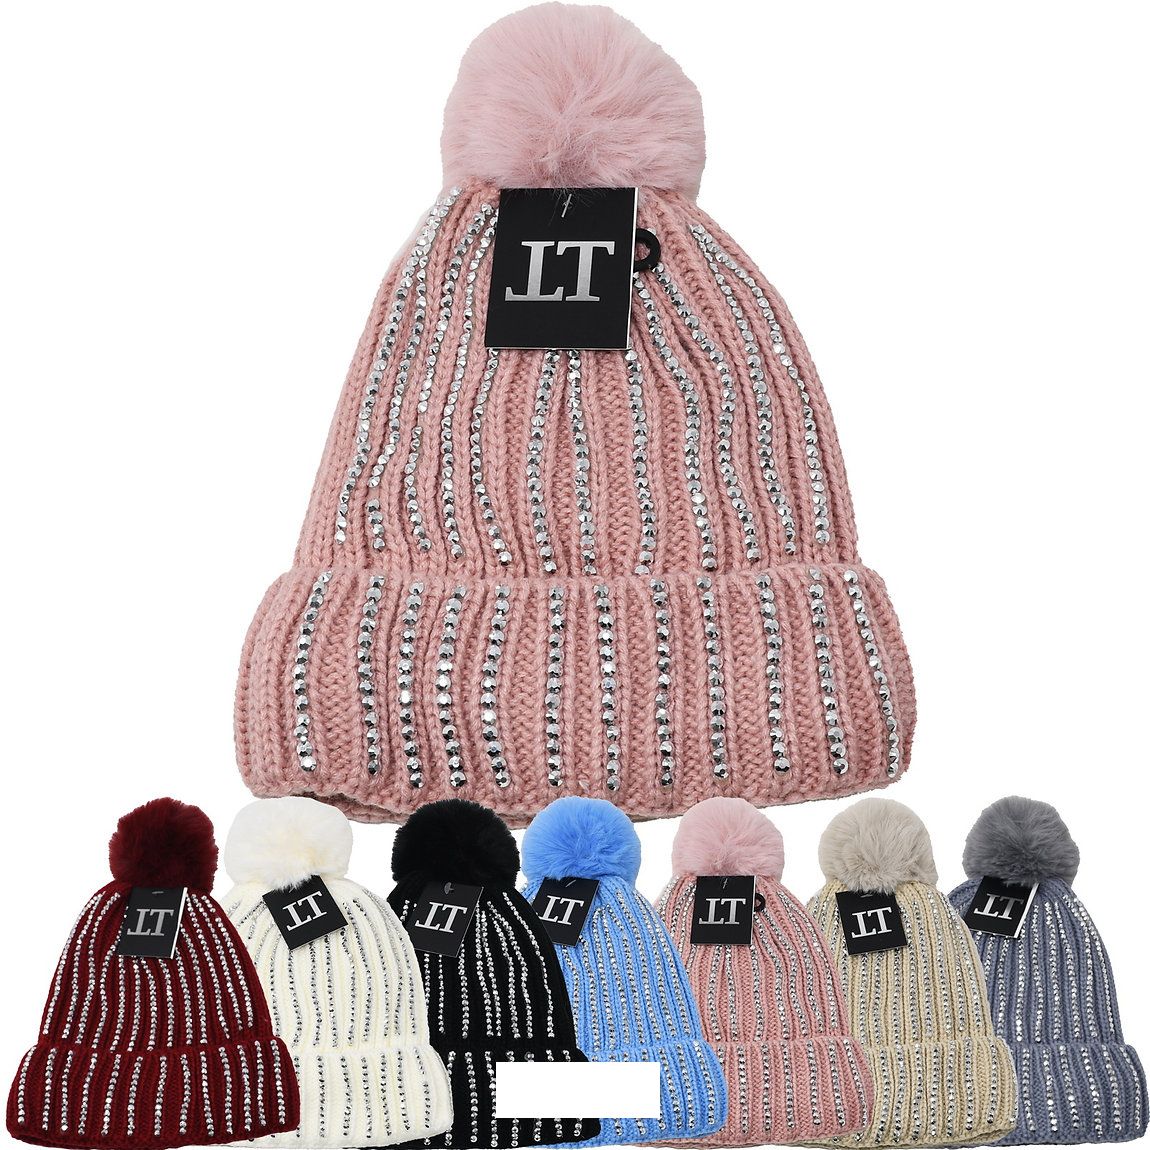 12 Pieces of Women's Winter Knitted Hats With Pompoms And Fleece Lining In Assorted Colors